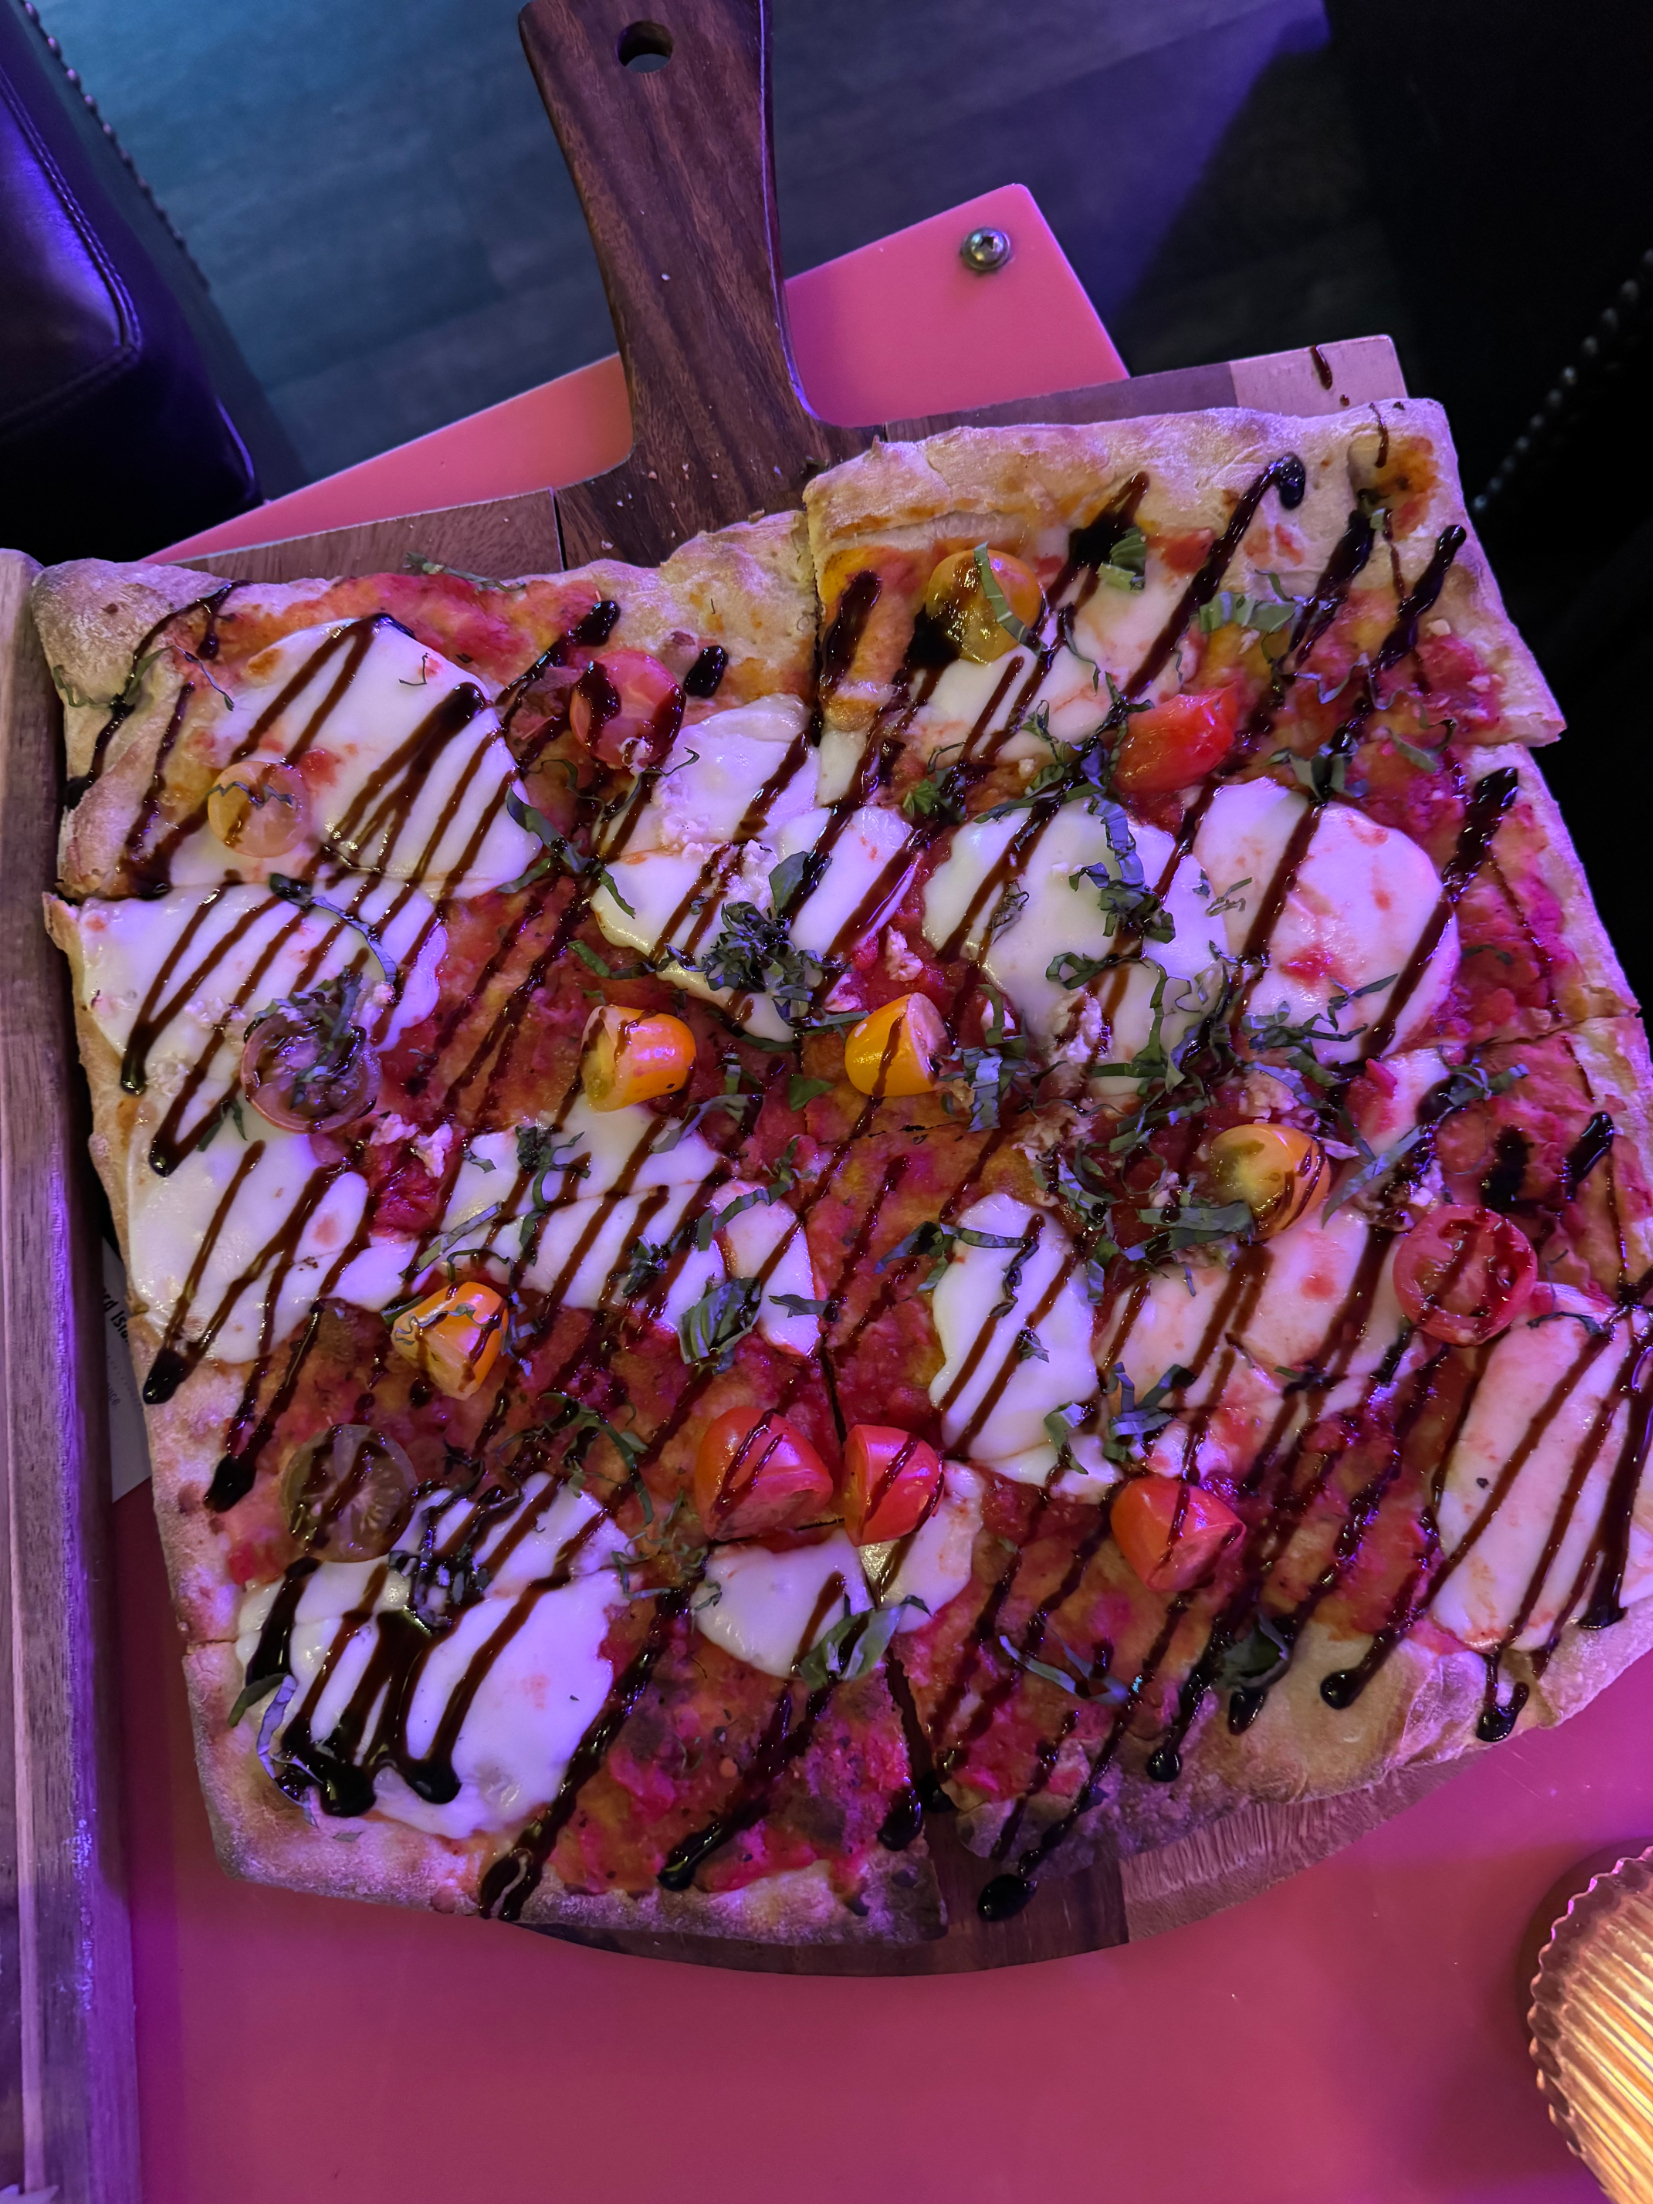 Flatbread pizza with drizzled sauce and assorted toppings on a wooden board